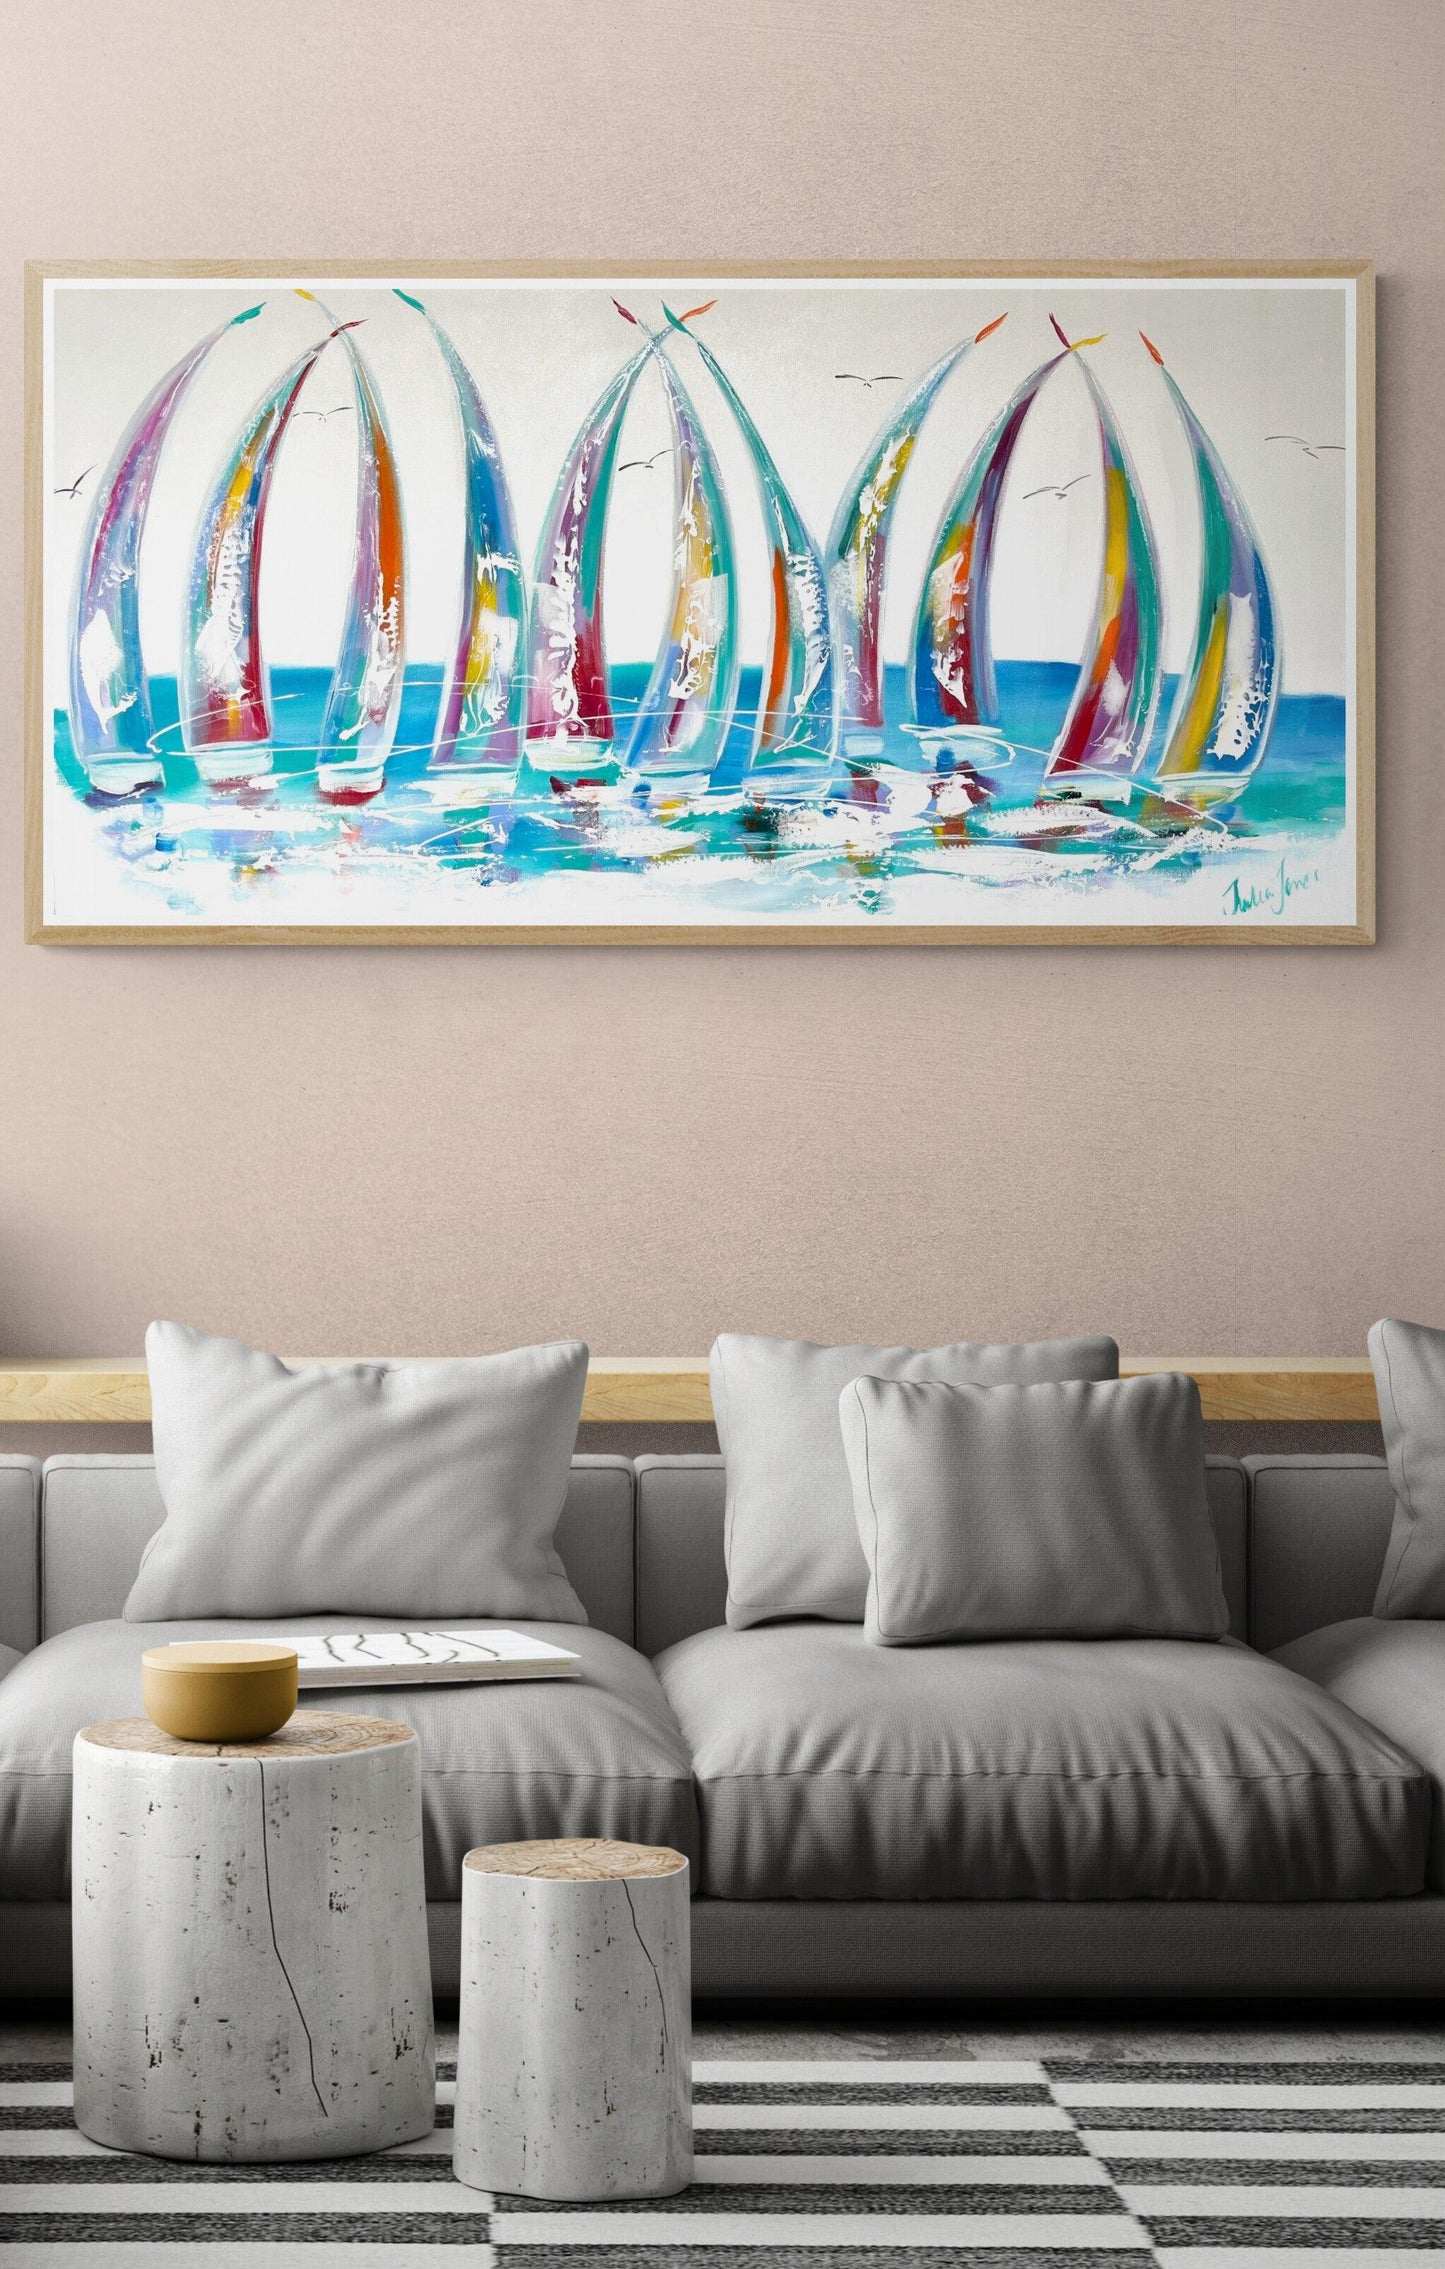 Sailing in a world of colour - 1.4x700 - Original Artwork - Available by Commission